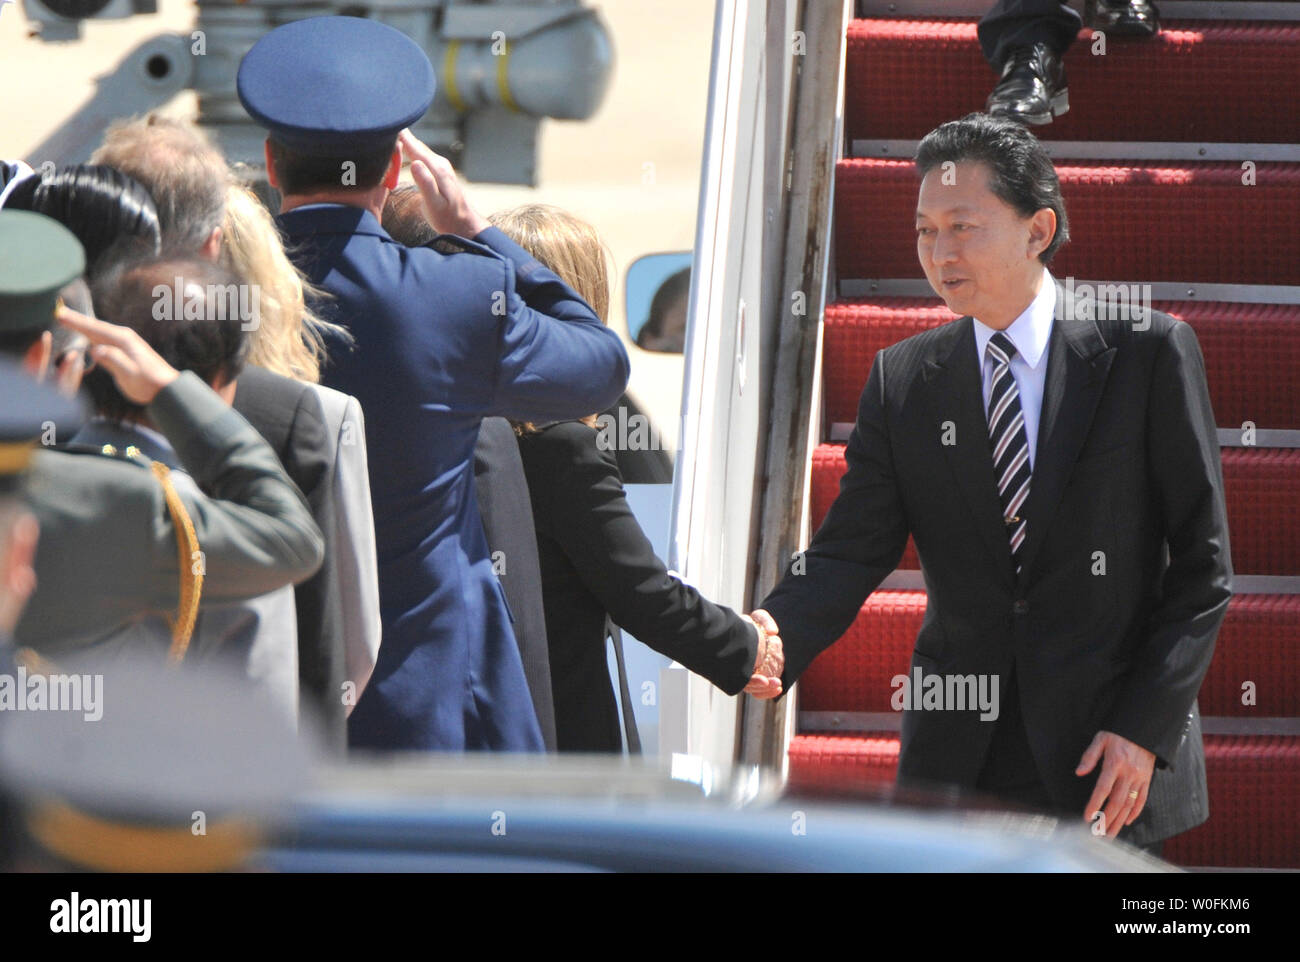 Japanese Prime Minister Yukio Hatoyama arrives for the Nuclear Security Summit, at Andrews Air Force Base, Maryland, April 12, 2010.  UPI/Kevin Dietsch Stock Photo